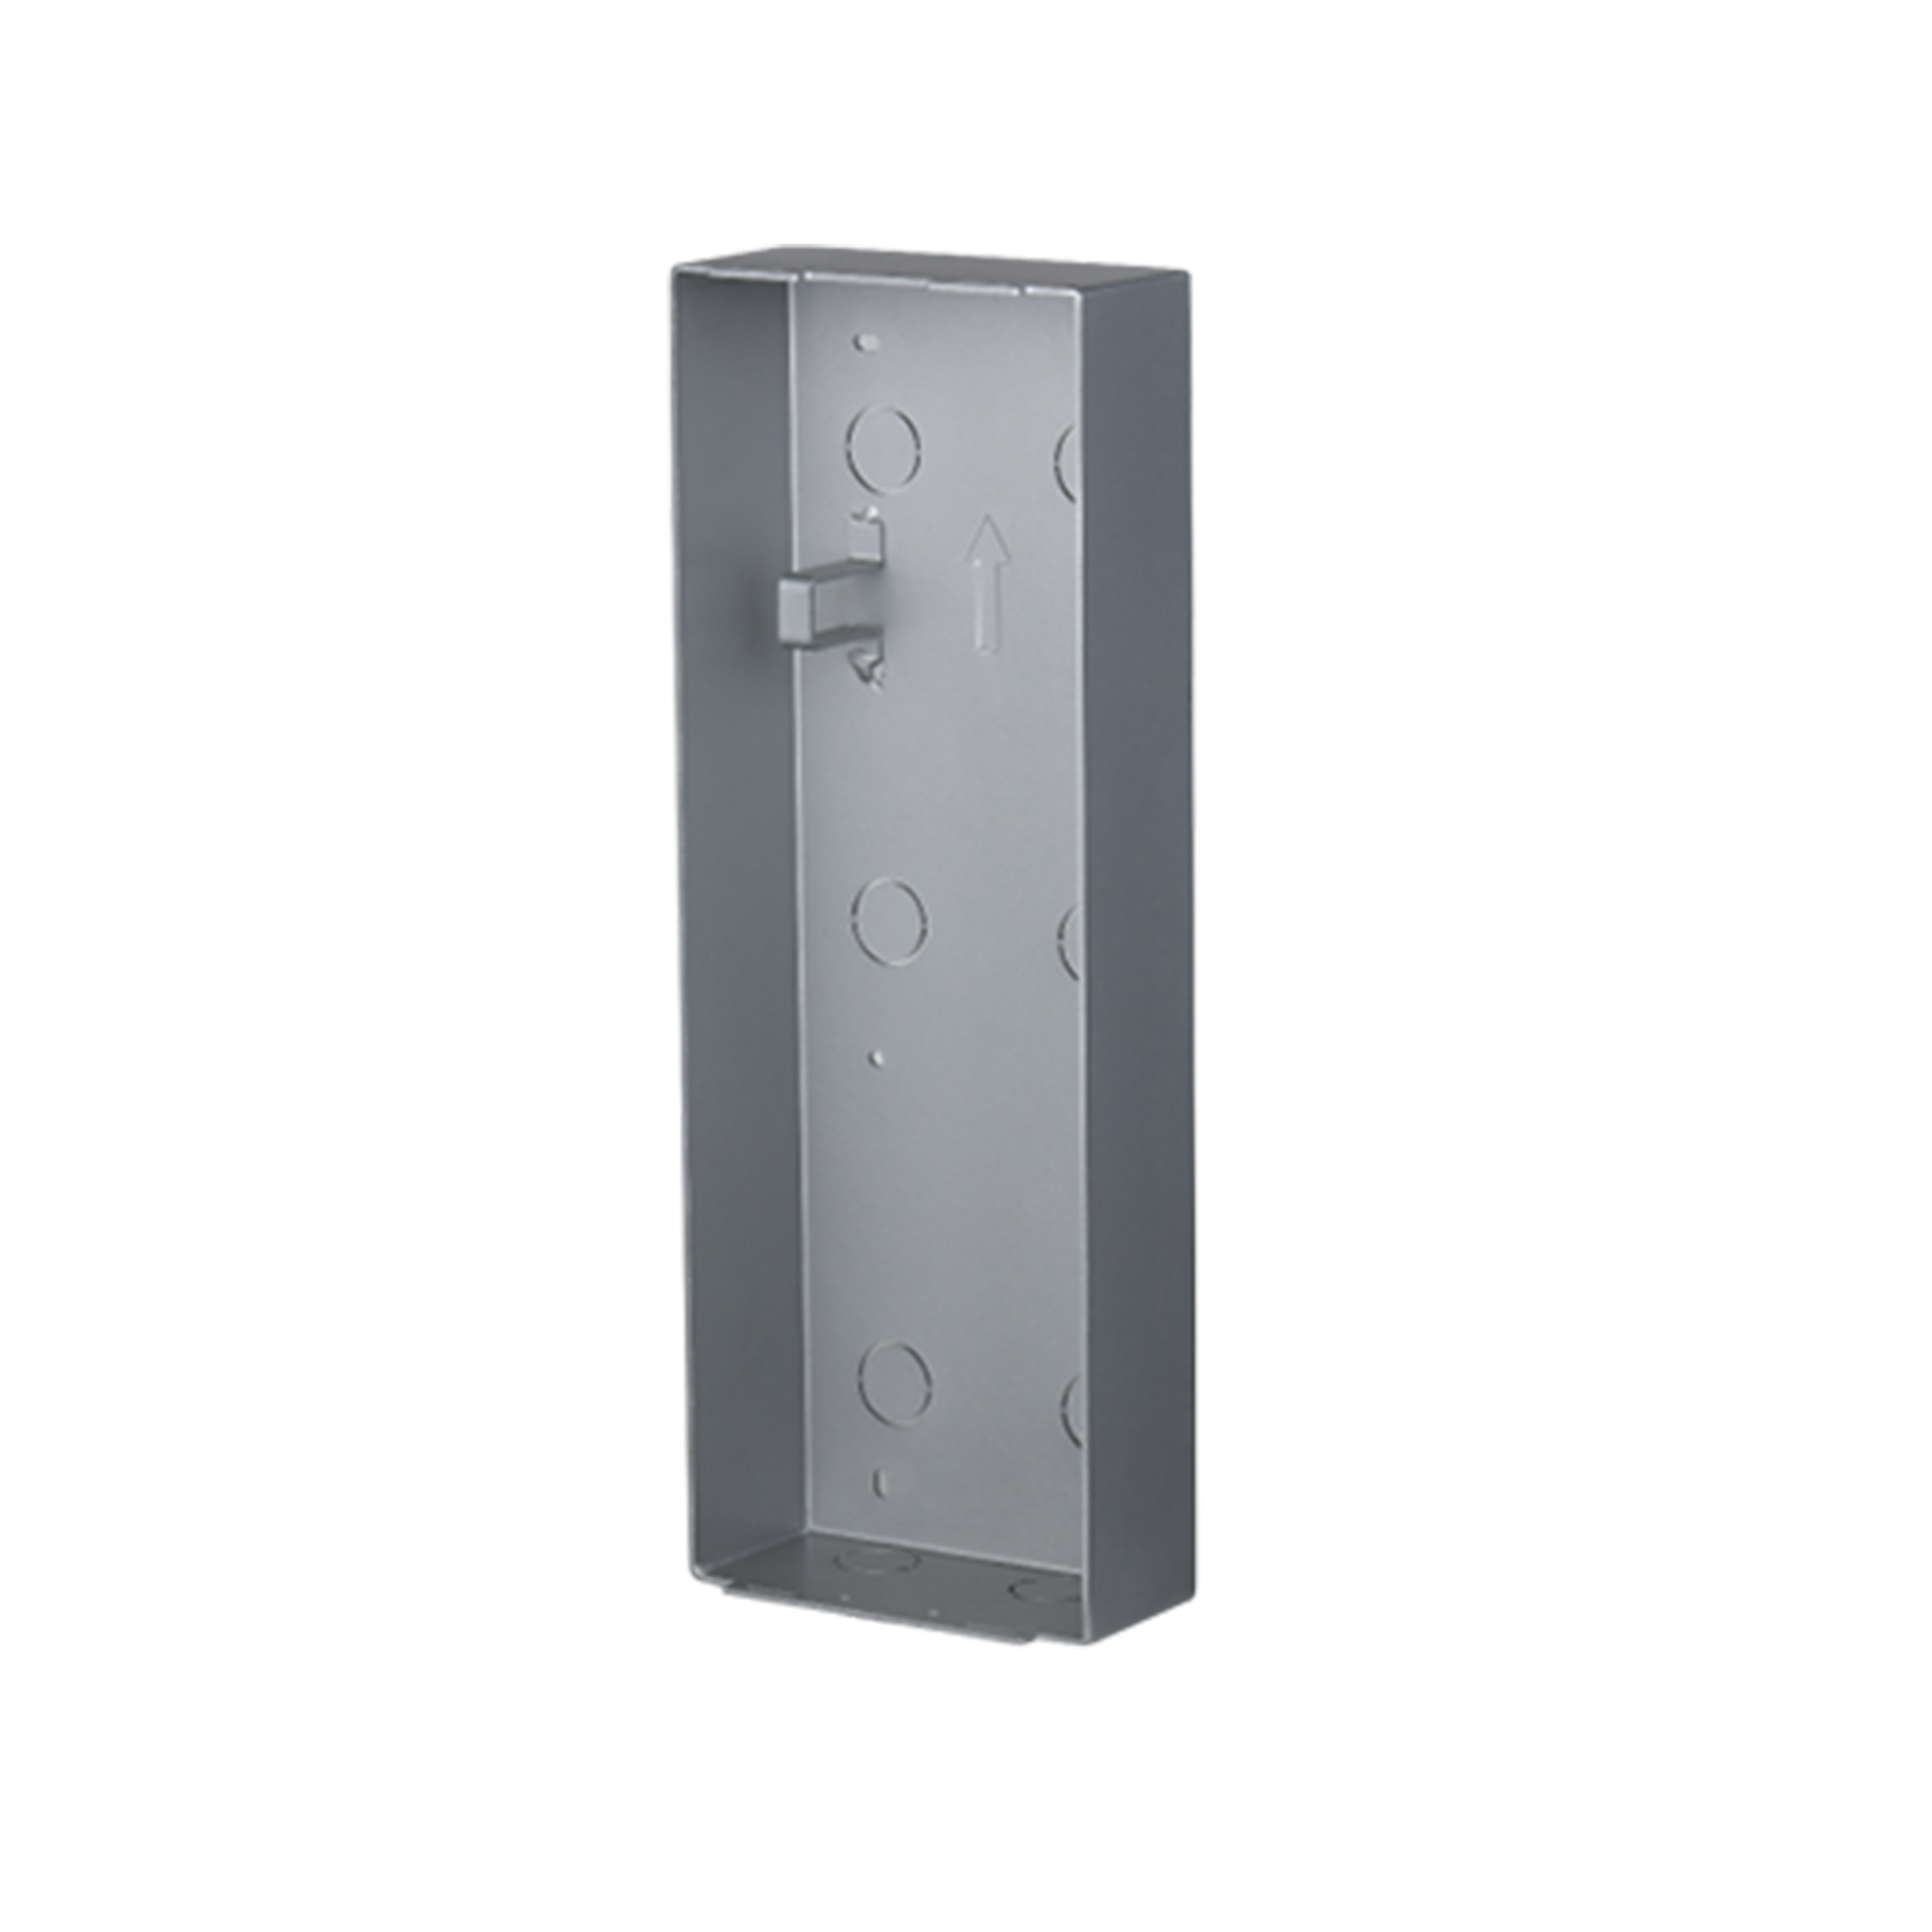 DAHUA VTM130 Surface Mounting Plate for VTO65/75 Series Door Station